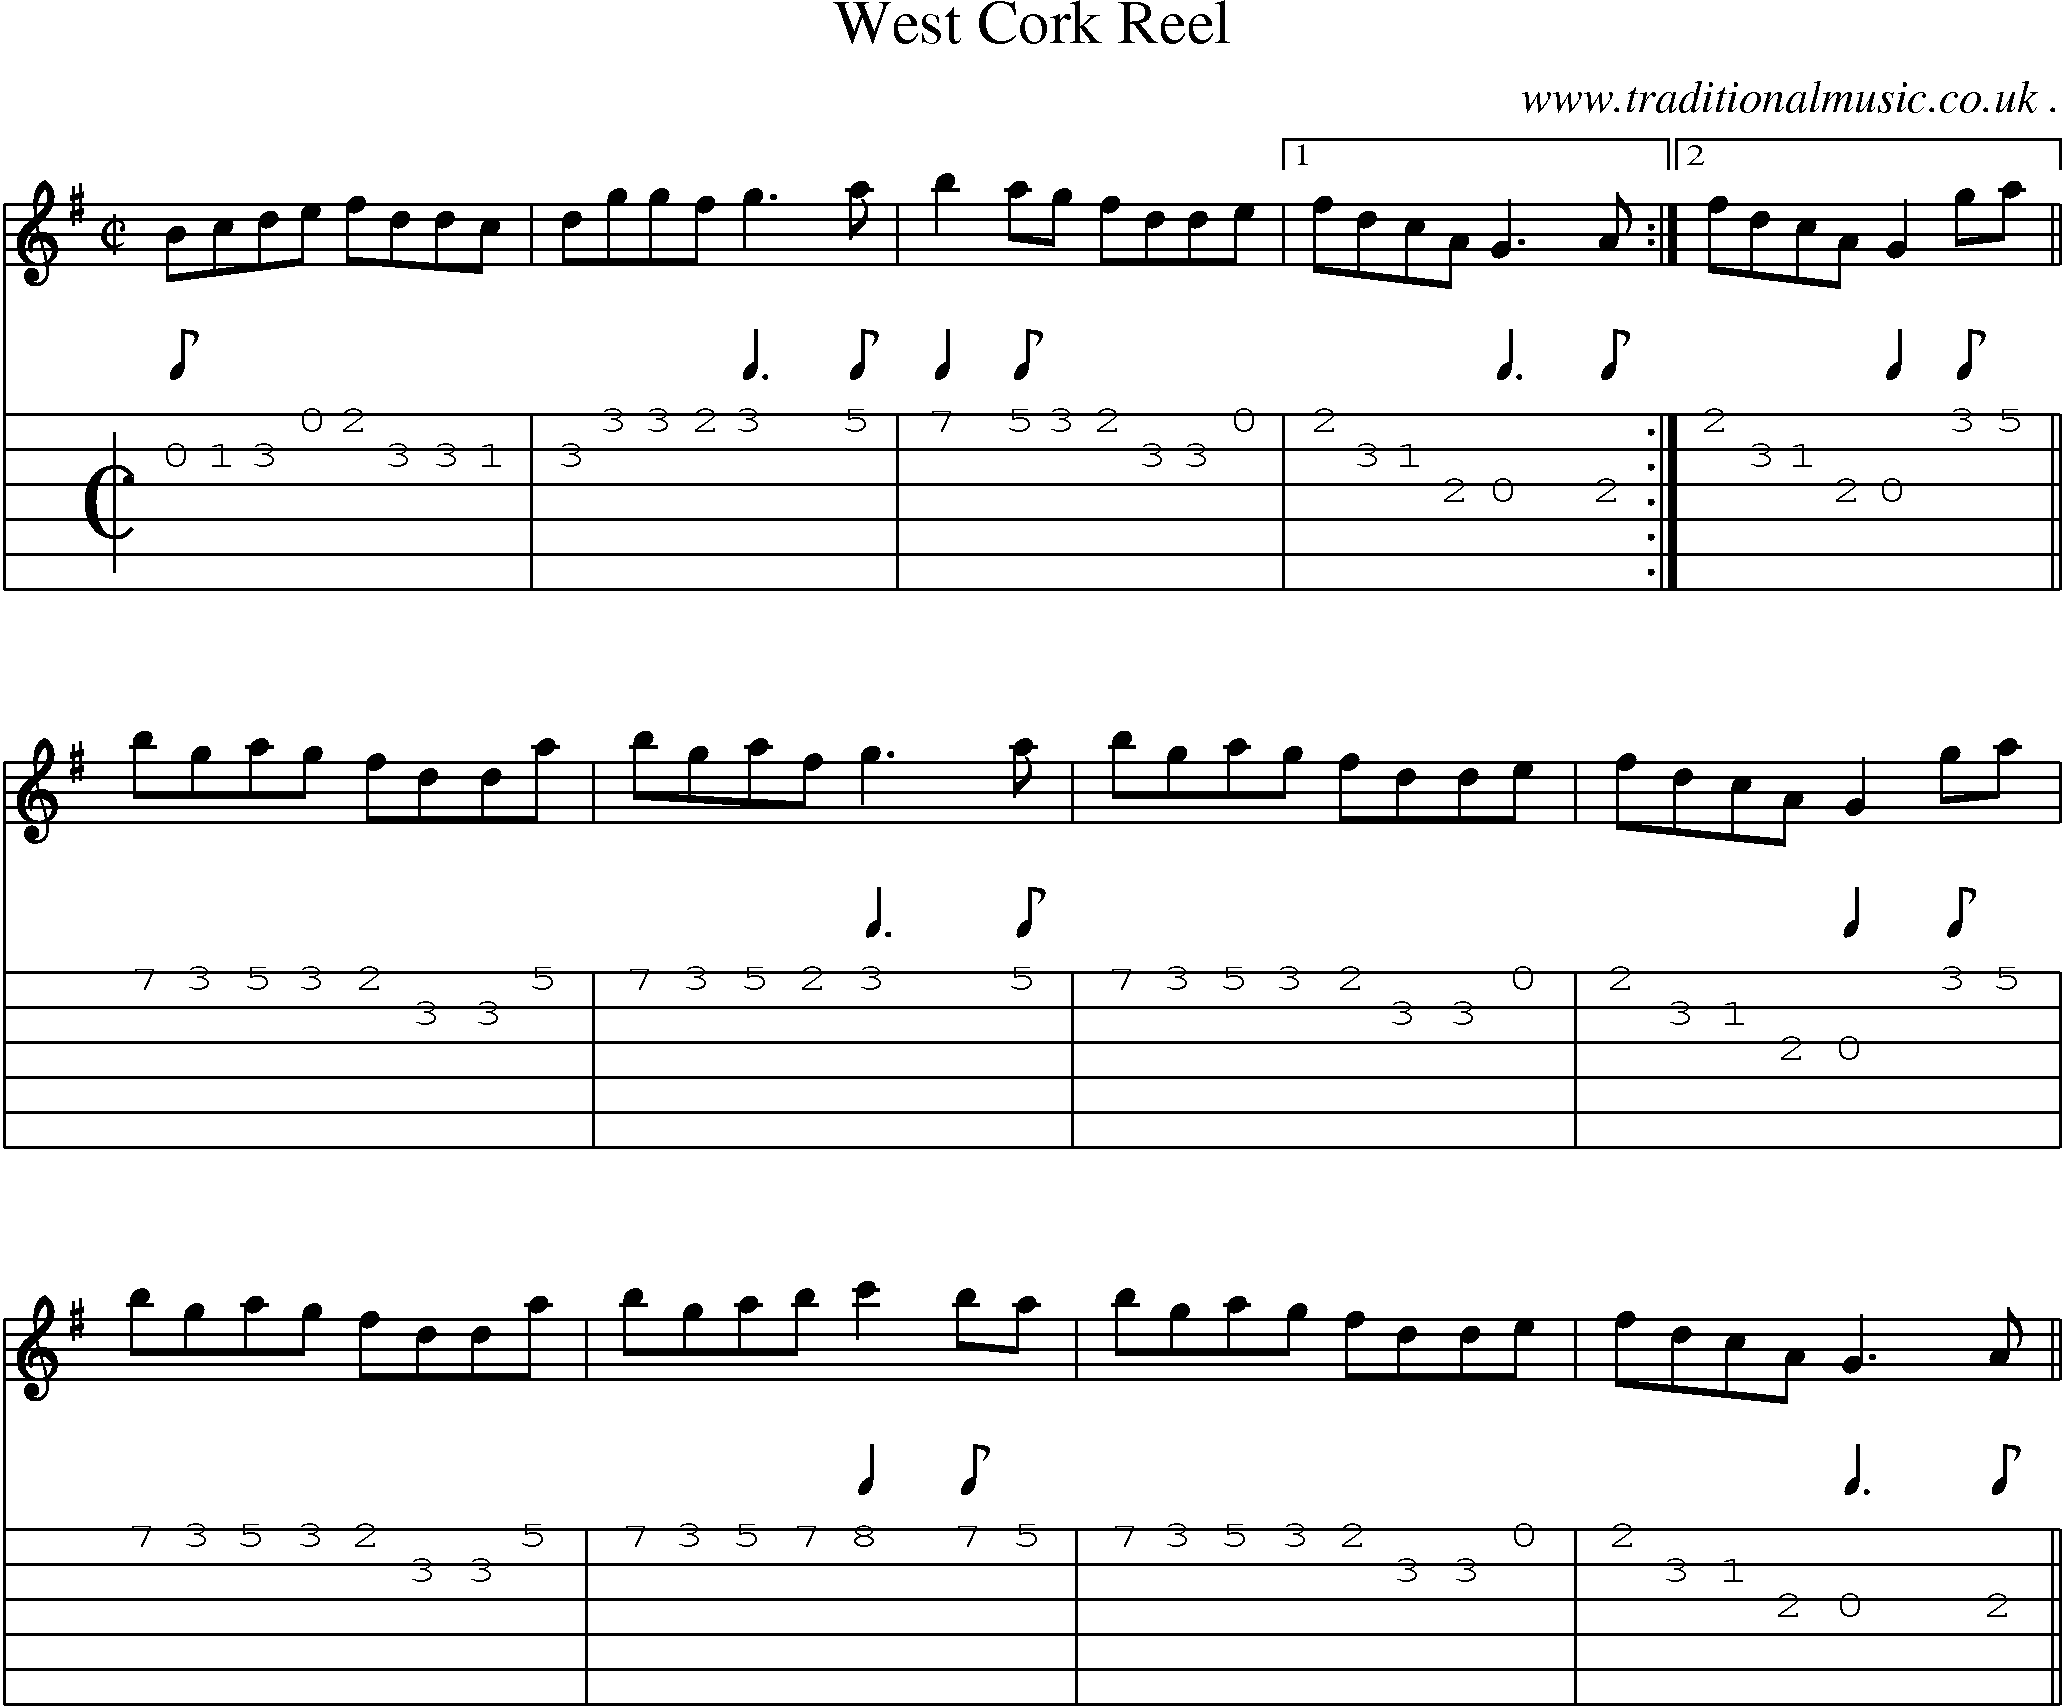 Sheet-Music and Guitar Tabs for West Cork Reel